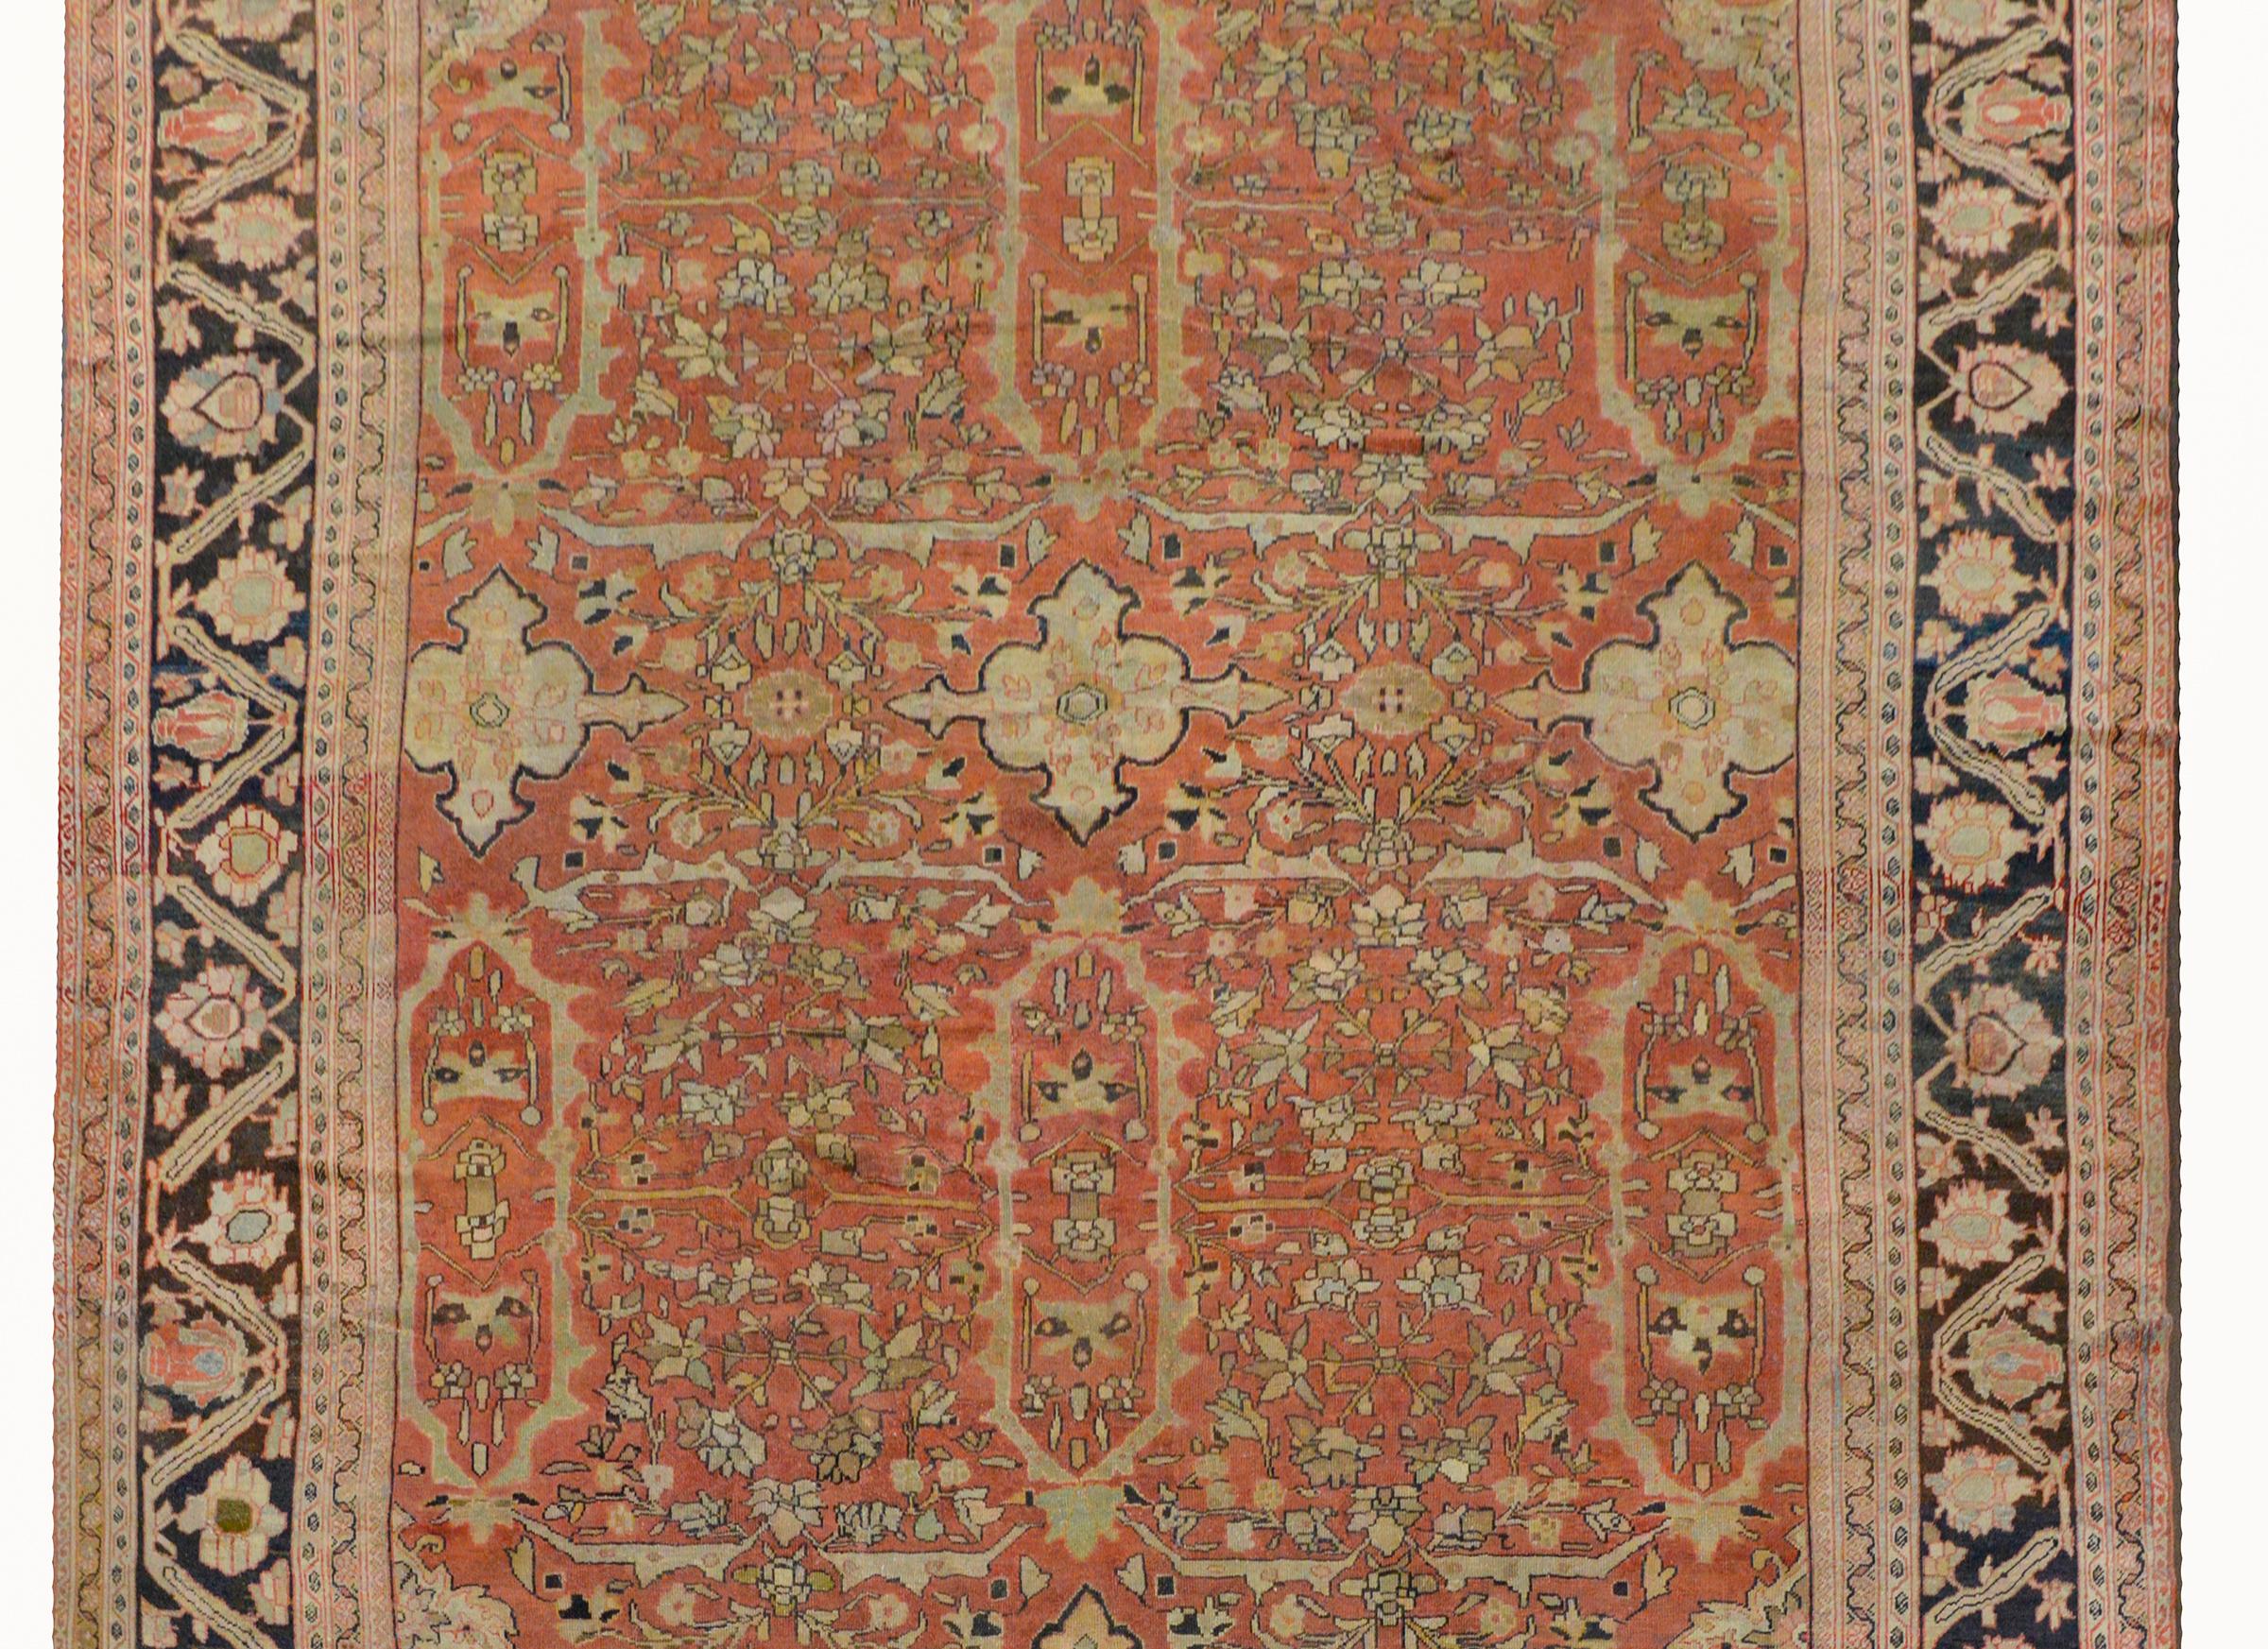 An outstanding early 20th century Persian palatial-scale Sultanabad rug with an exquisite all-over scrolling vine and floral pattern woven in pale colors of green, indigo, cream, and pink, and a soft salmon colored background. The border is wide